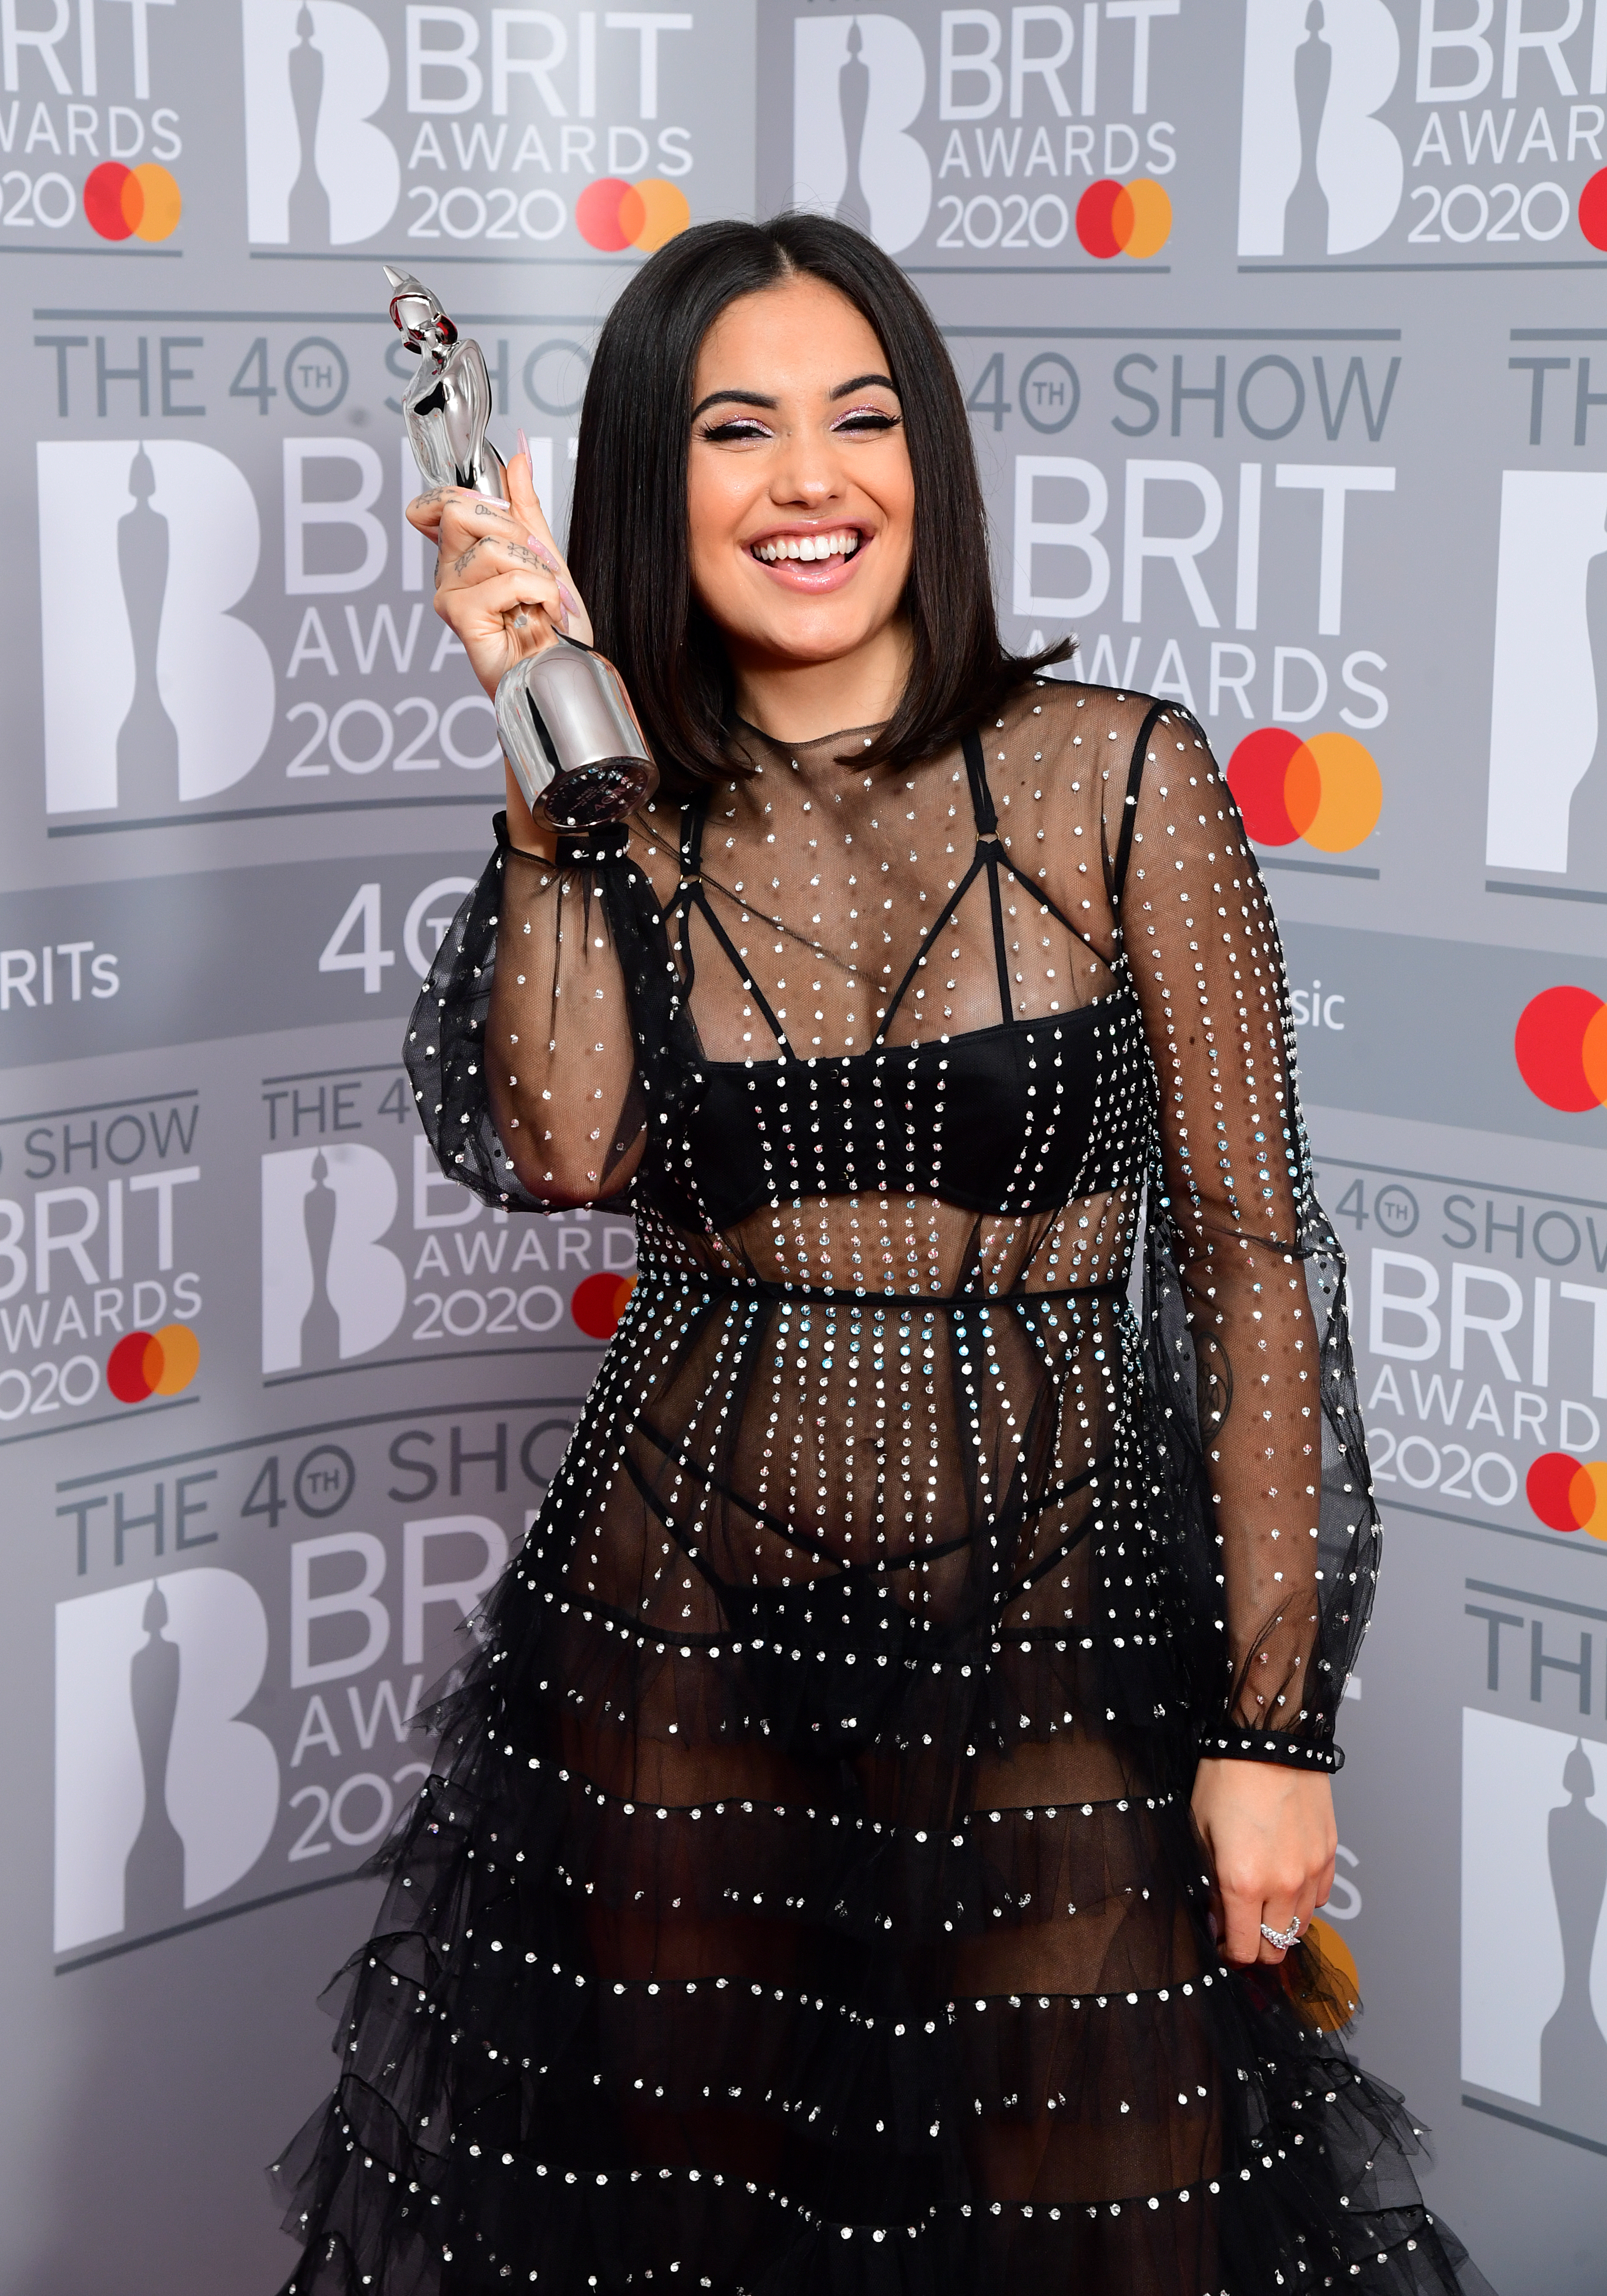 Mabel with her Brit Award for Best British Female